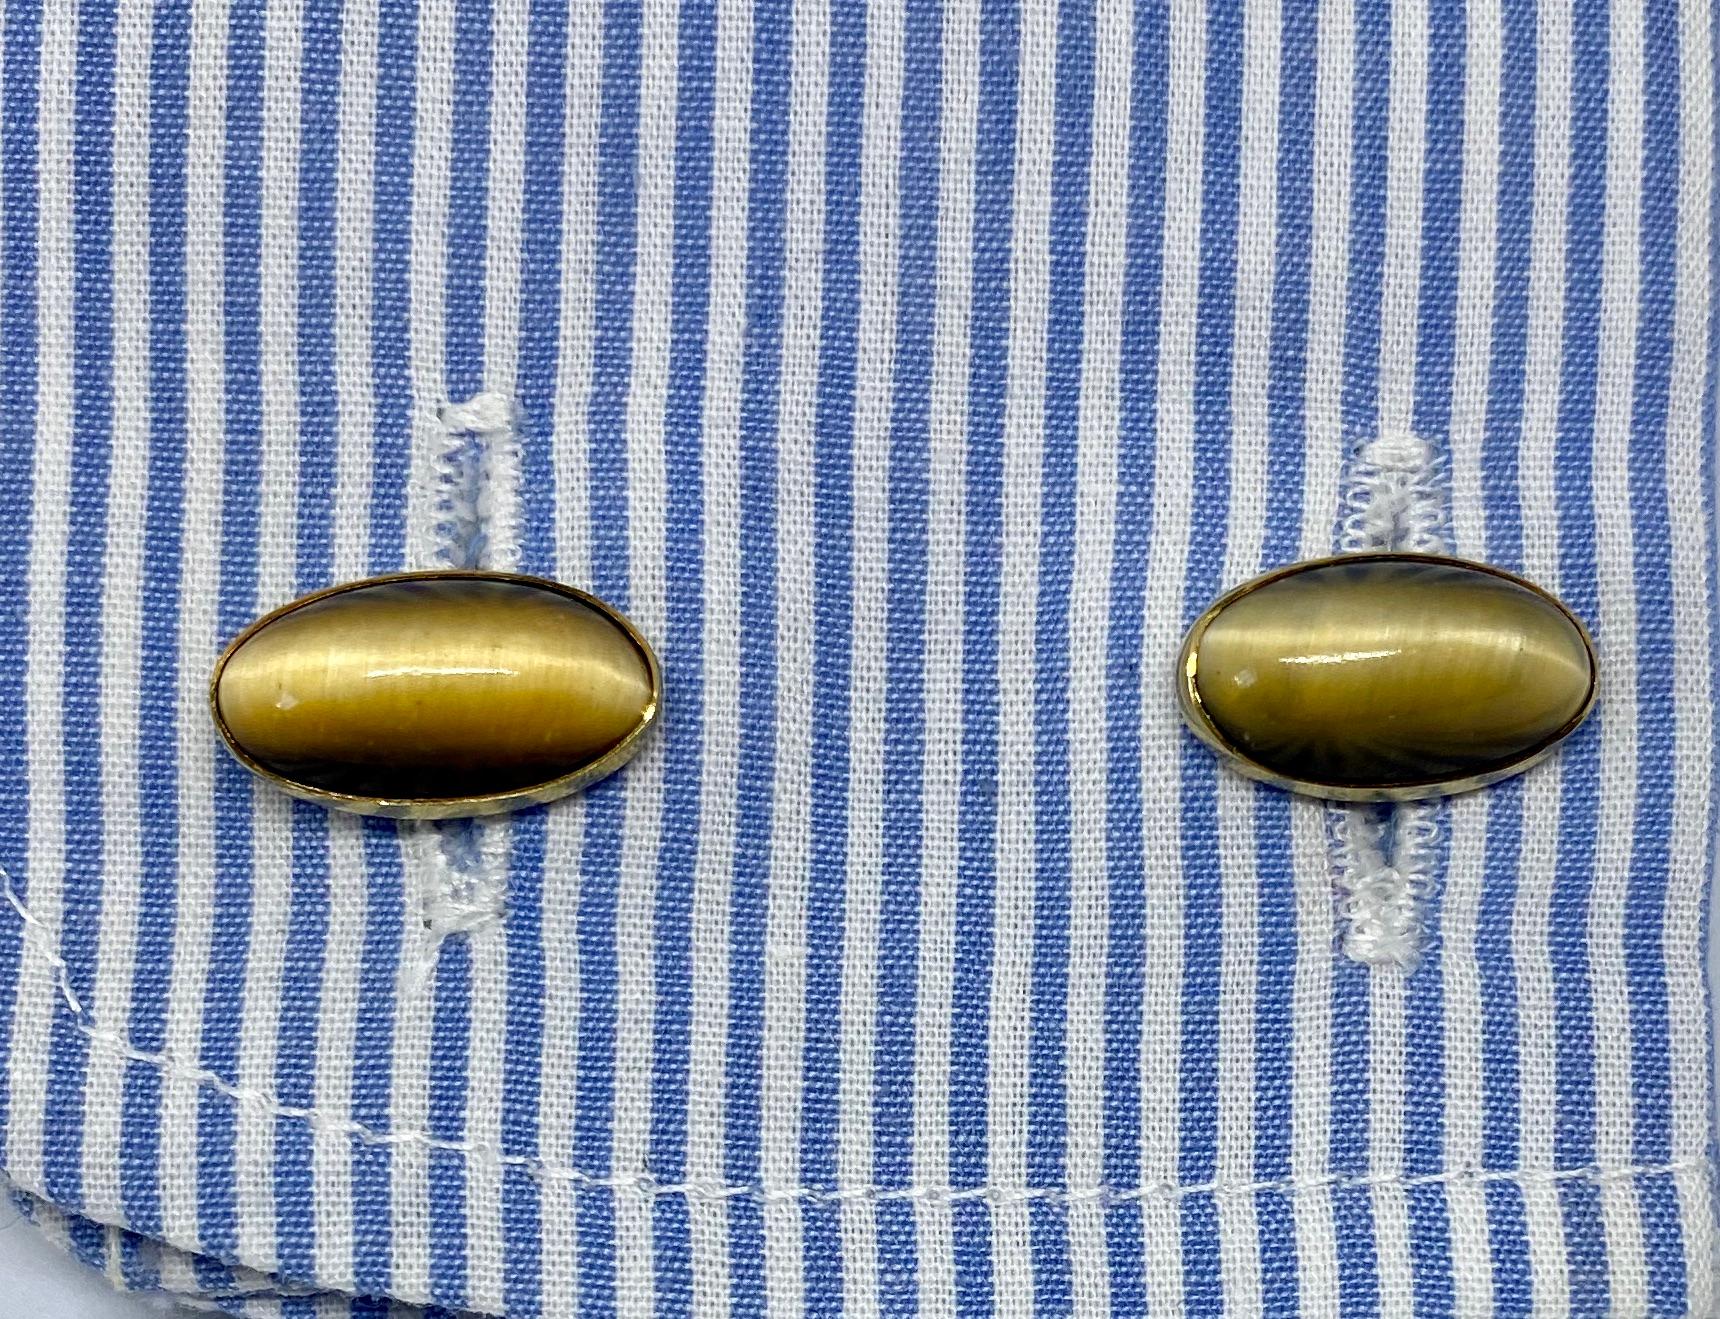 Truly exceptional, double-sided cufflinks by prominent American maker Sansbury & Nellis featuring four oblong tiger's eye cabochons set in 14K yellow gold. They're signed with the S-N maker's mark and 14K.

American cufflinks from the early 1900s